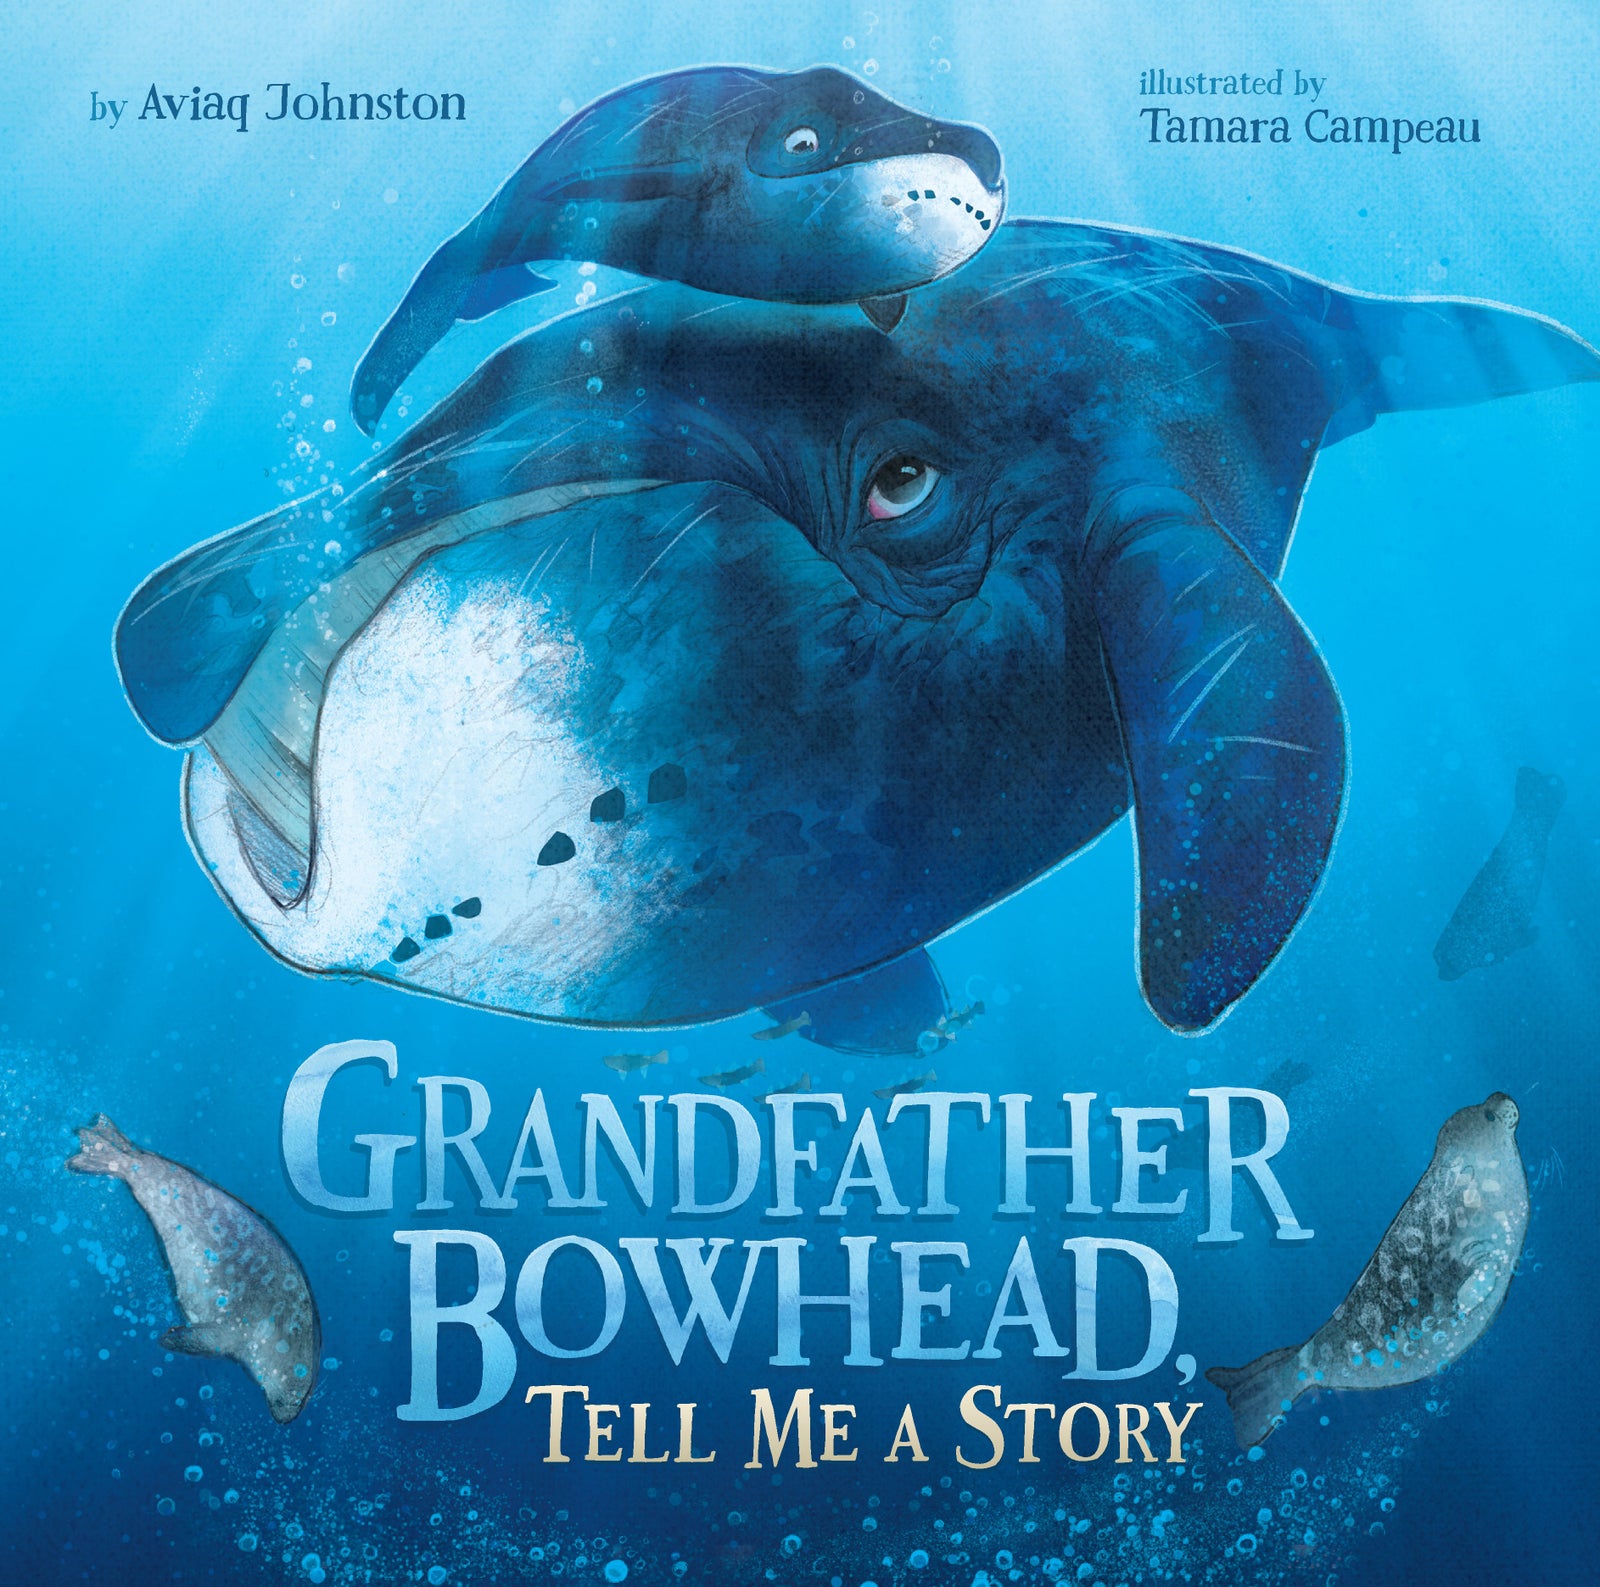 Grandfather Bowhead, Tell Me A Story